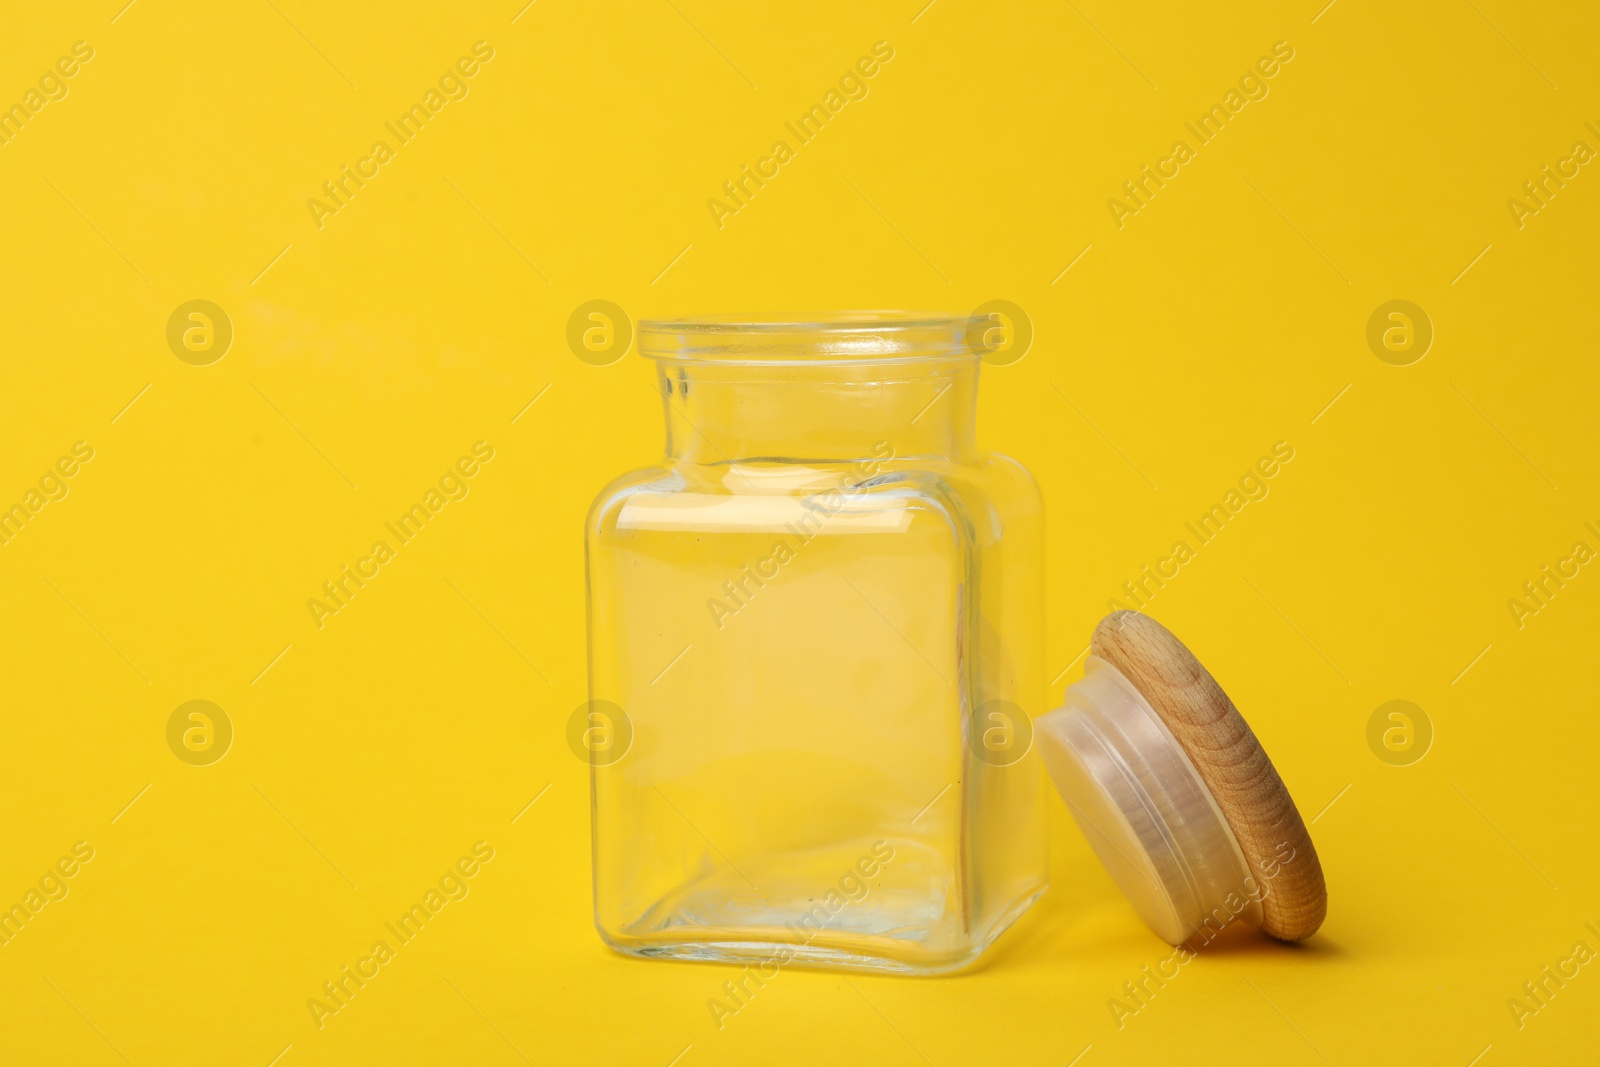 Photo of Open empty glass jar on yellow background